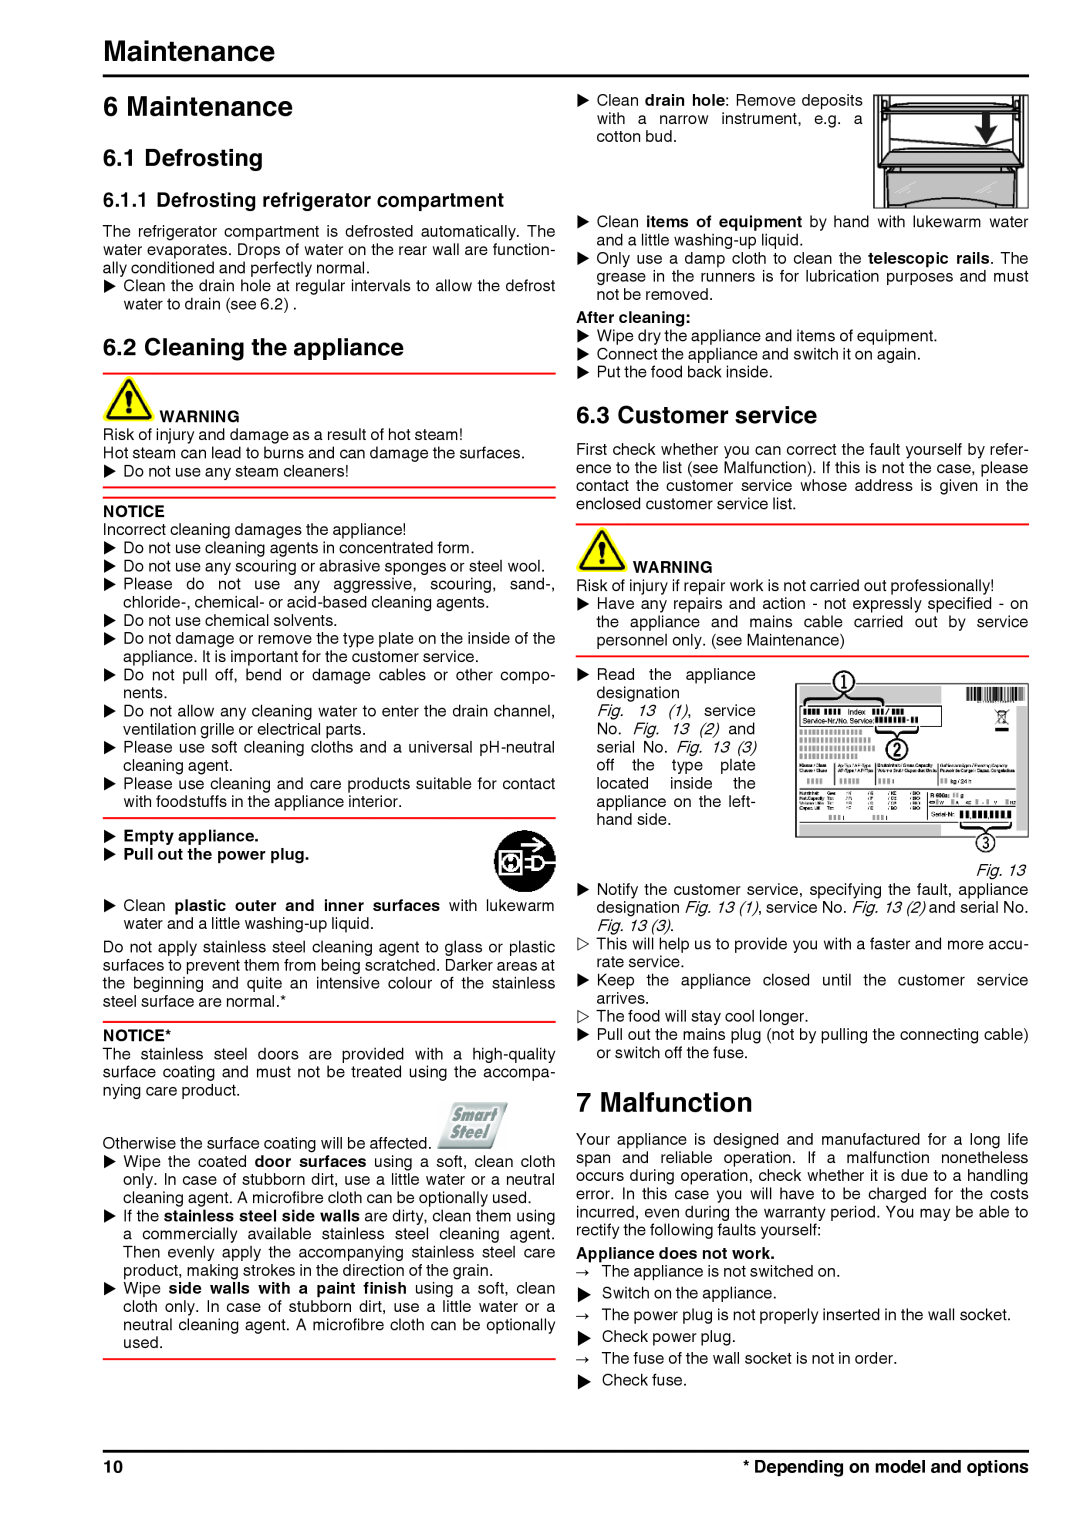 Liebherr 7085638-01 operating instructions Maintenance, Malfunction, Defrosting, Cleaning the appliance, Customer service 